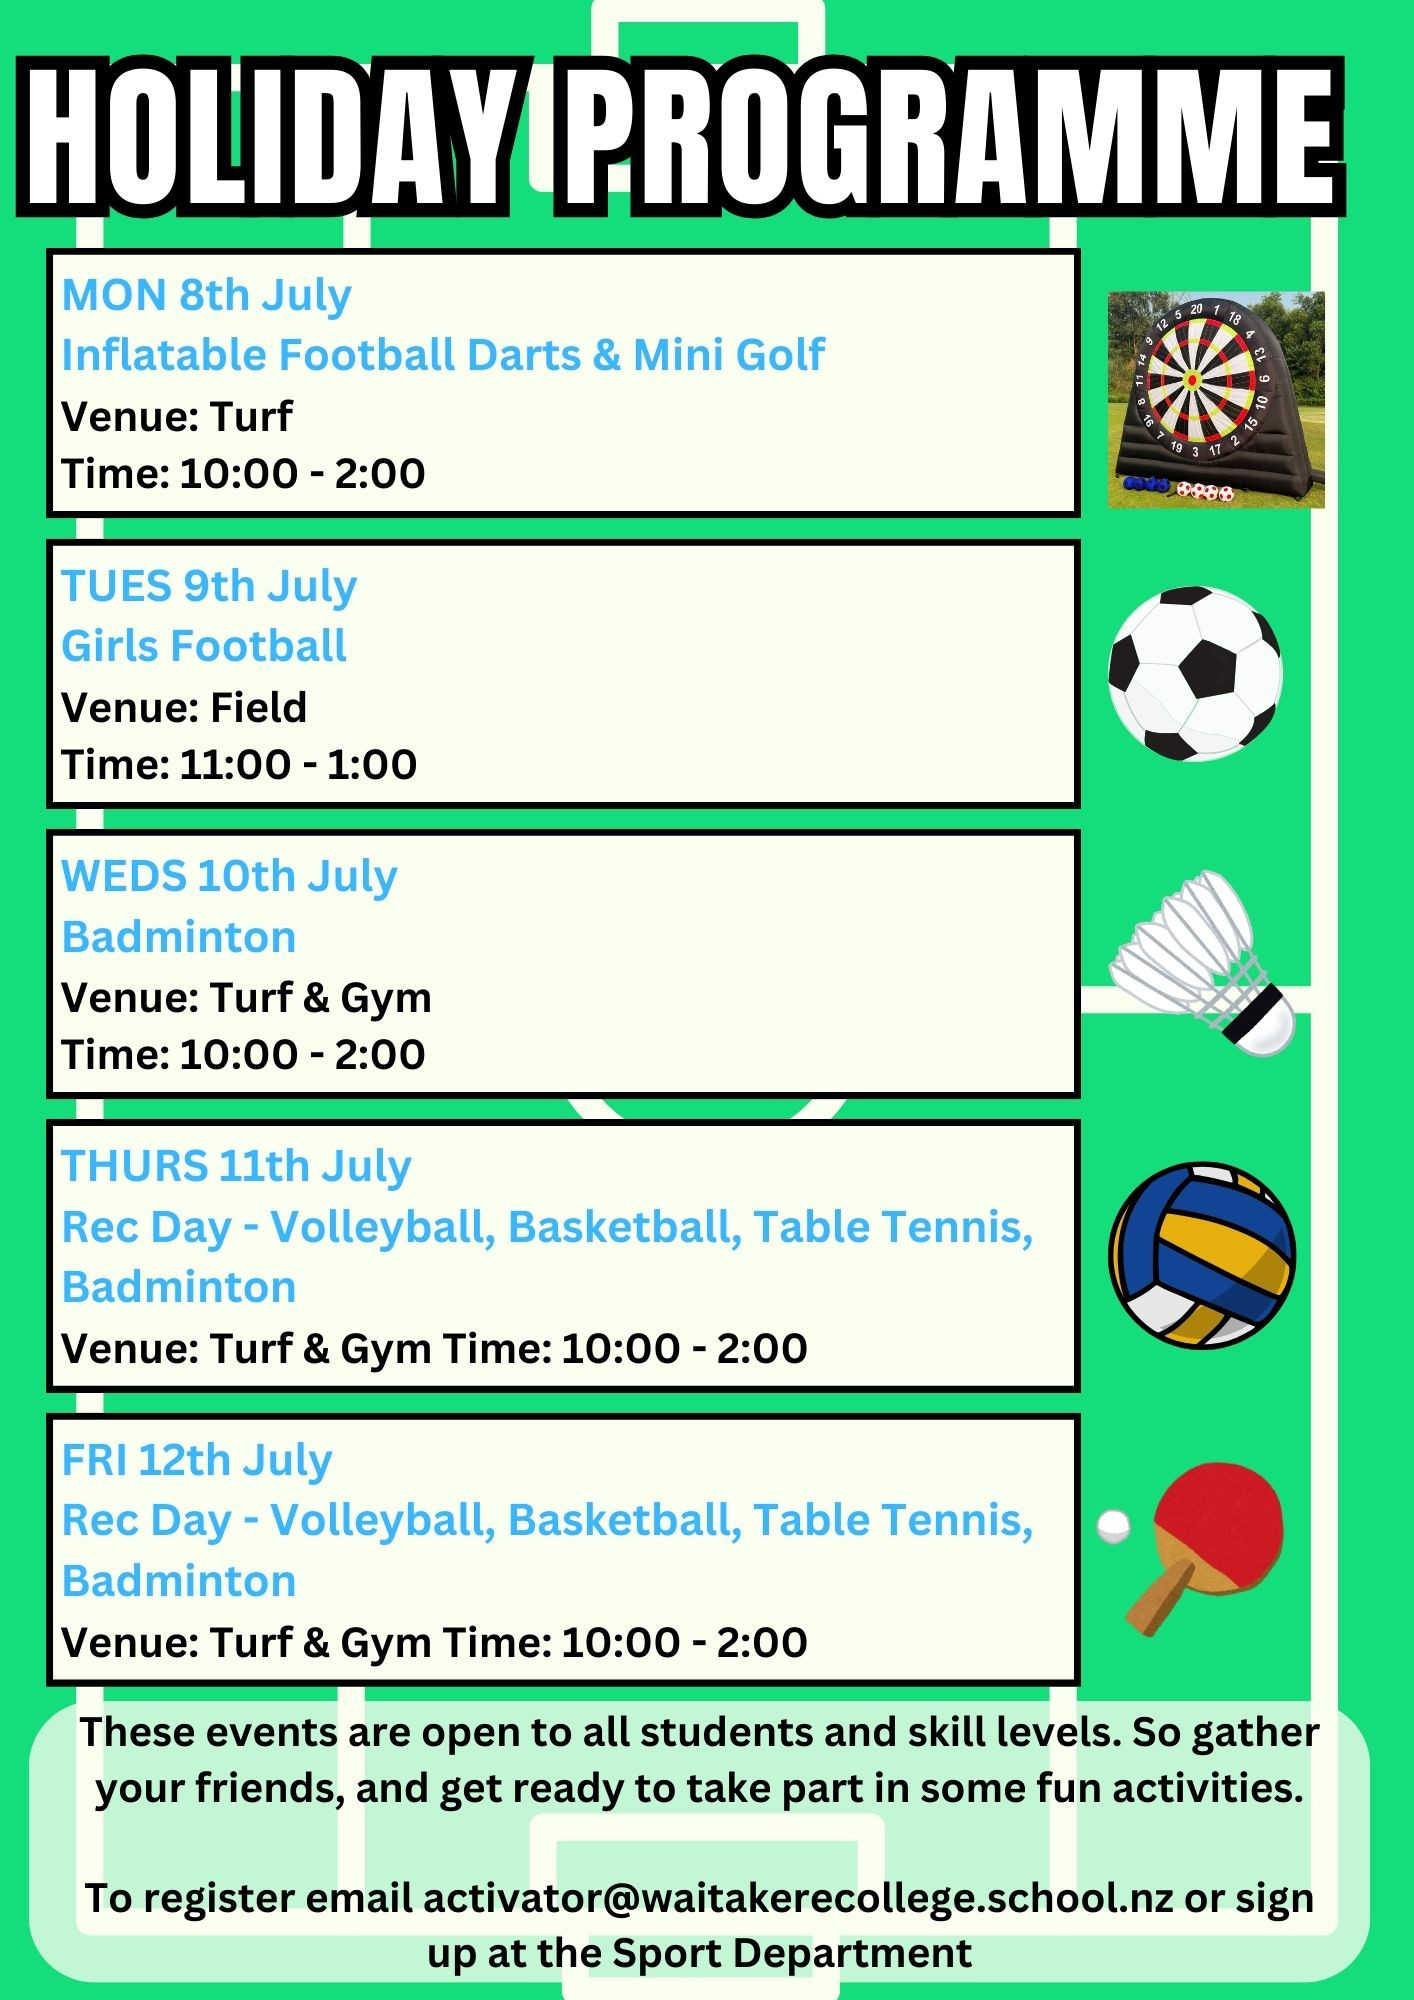 Sports Department Holiday Programme